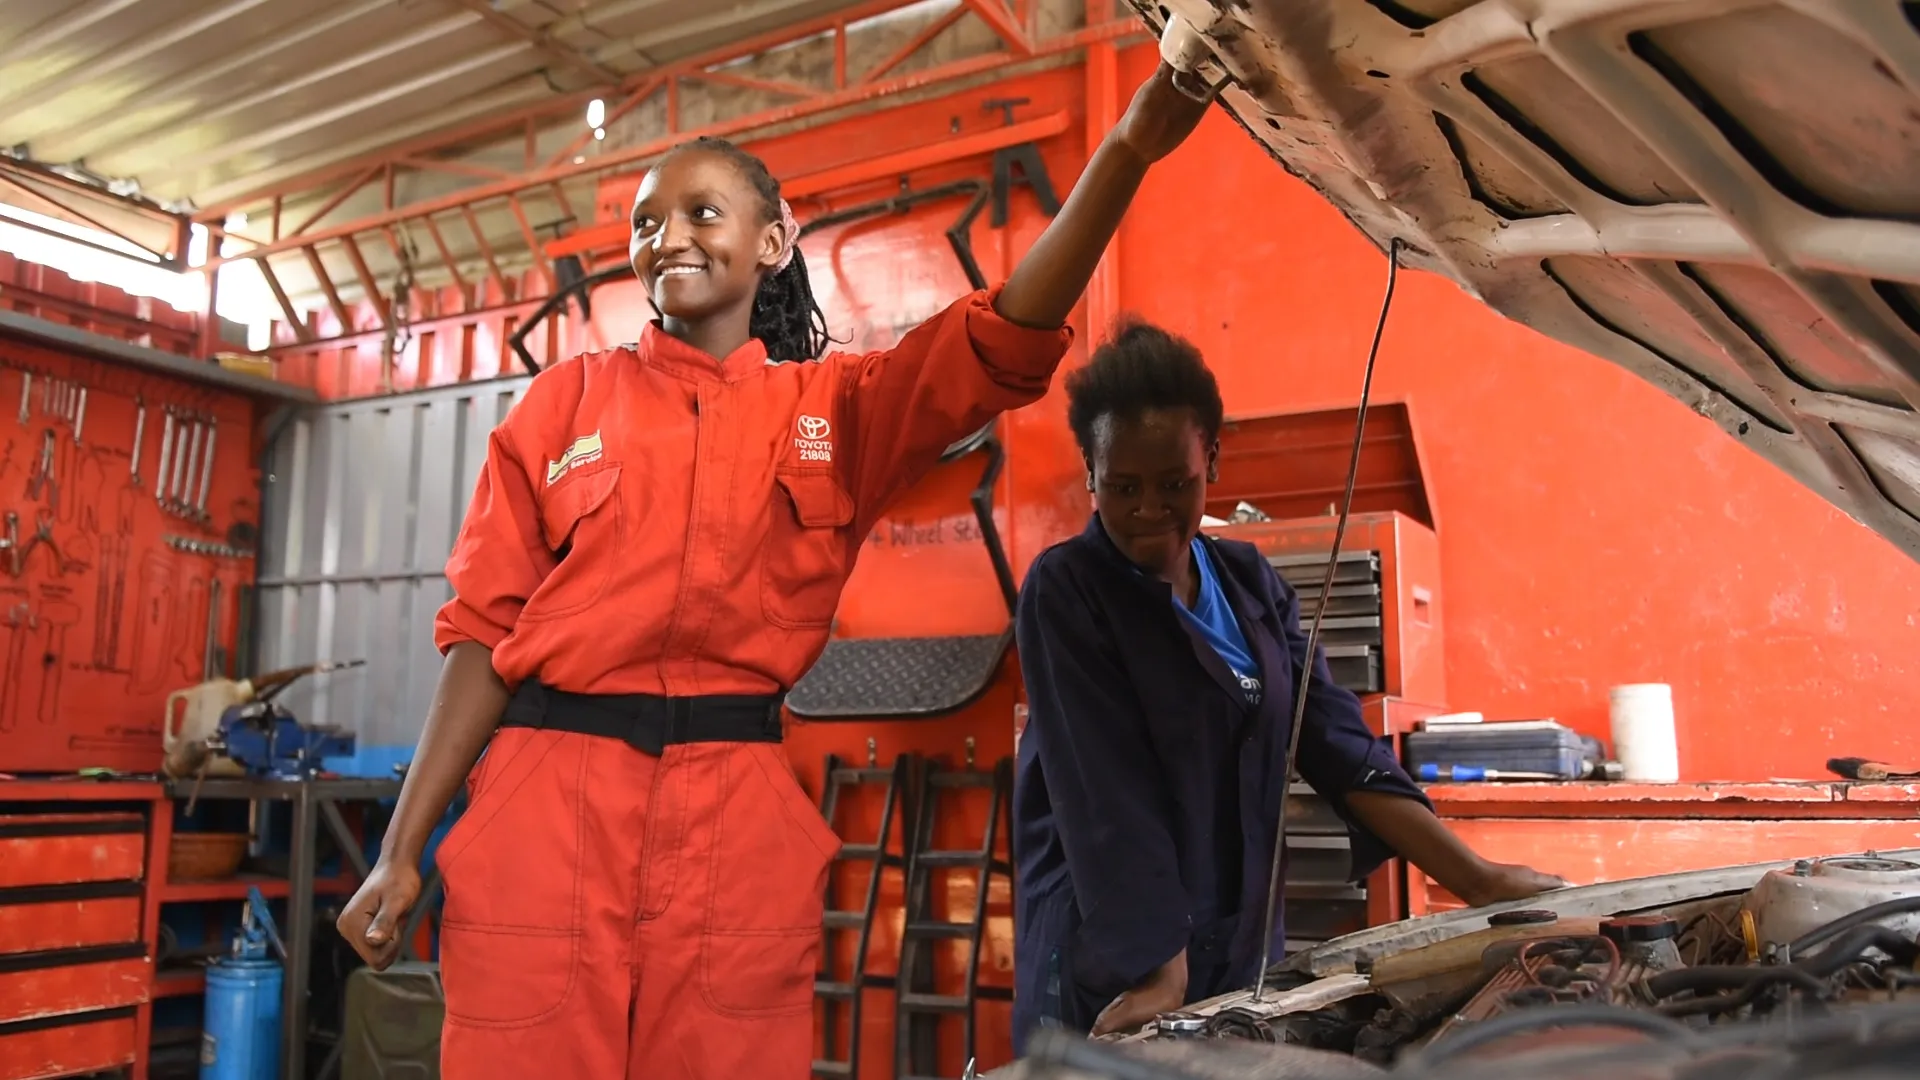 A few years ago, Peninah had the idea to train young women as auto mechanics. She knew the trade would offer them a chance to earn a living wage and believed women working in the male-dominated industry would actually have an edge. Photo: Kate Adelung/CARE